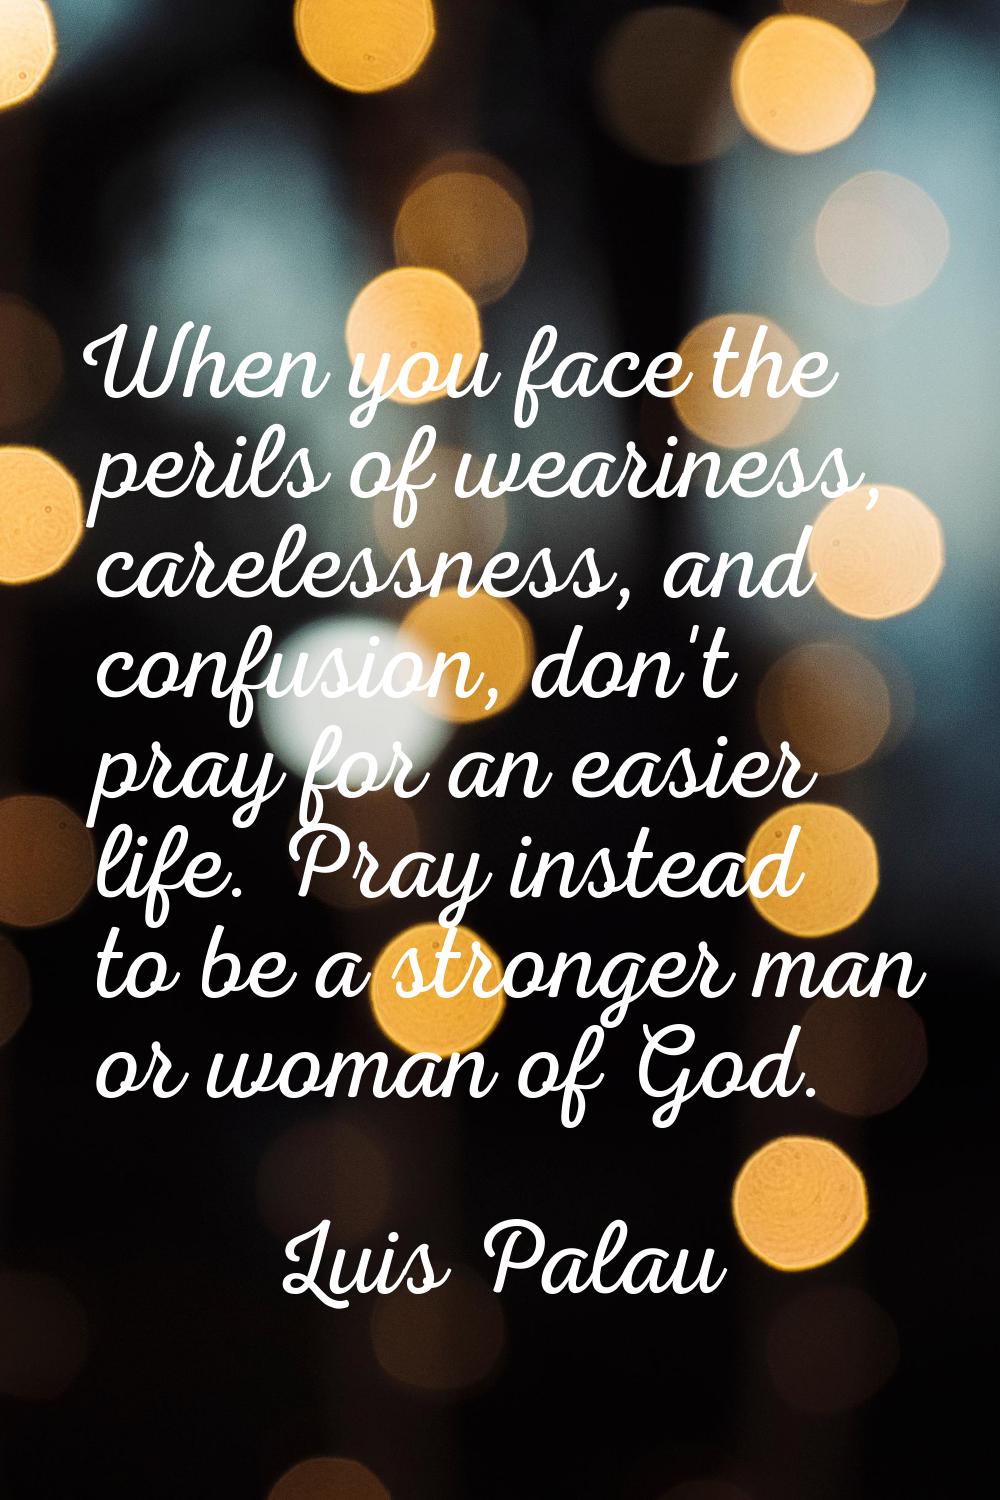 When you face the perils of weariness, carelessness, and confusion, don't pray for an easier life. 